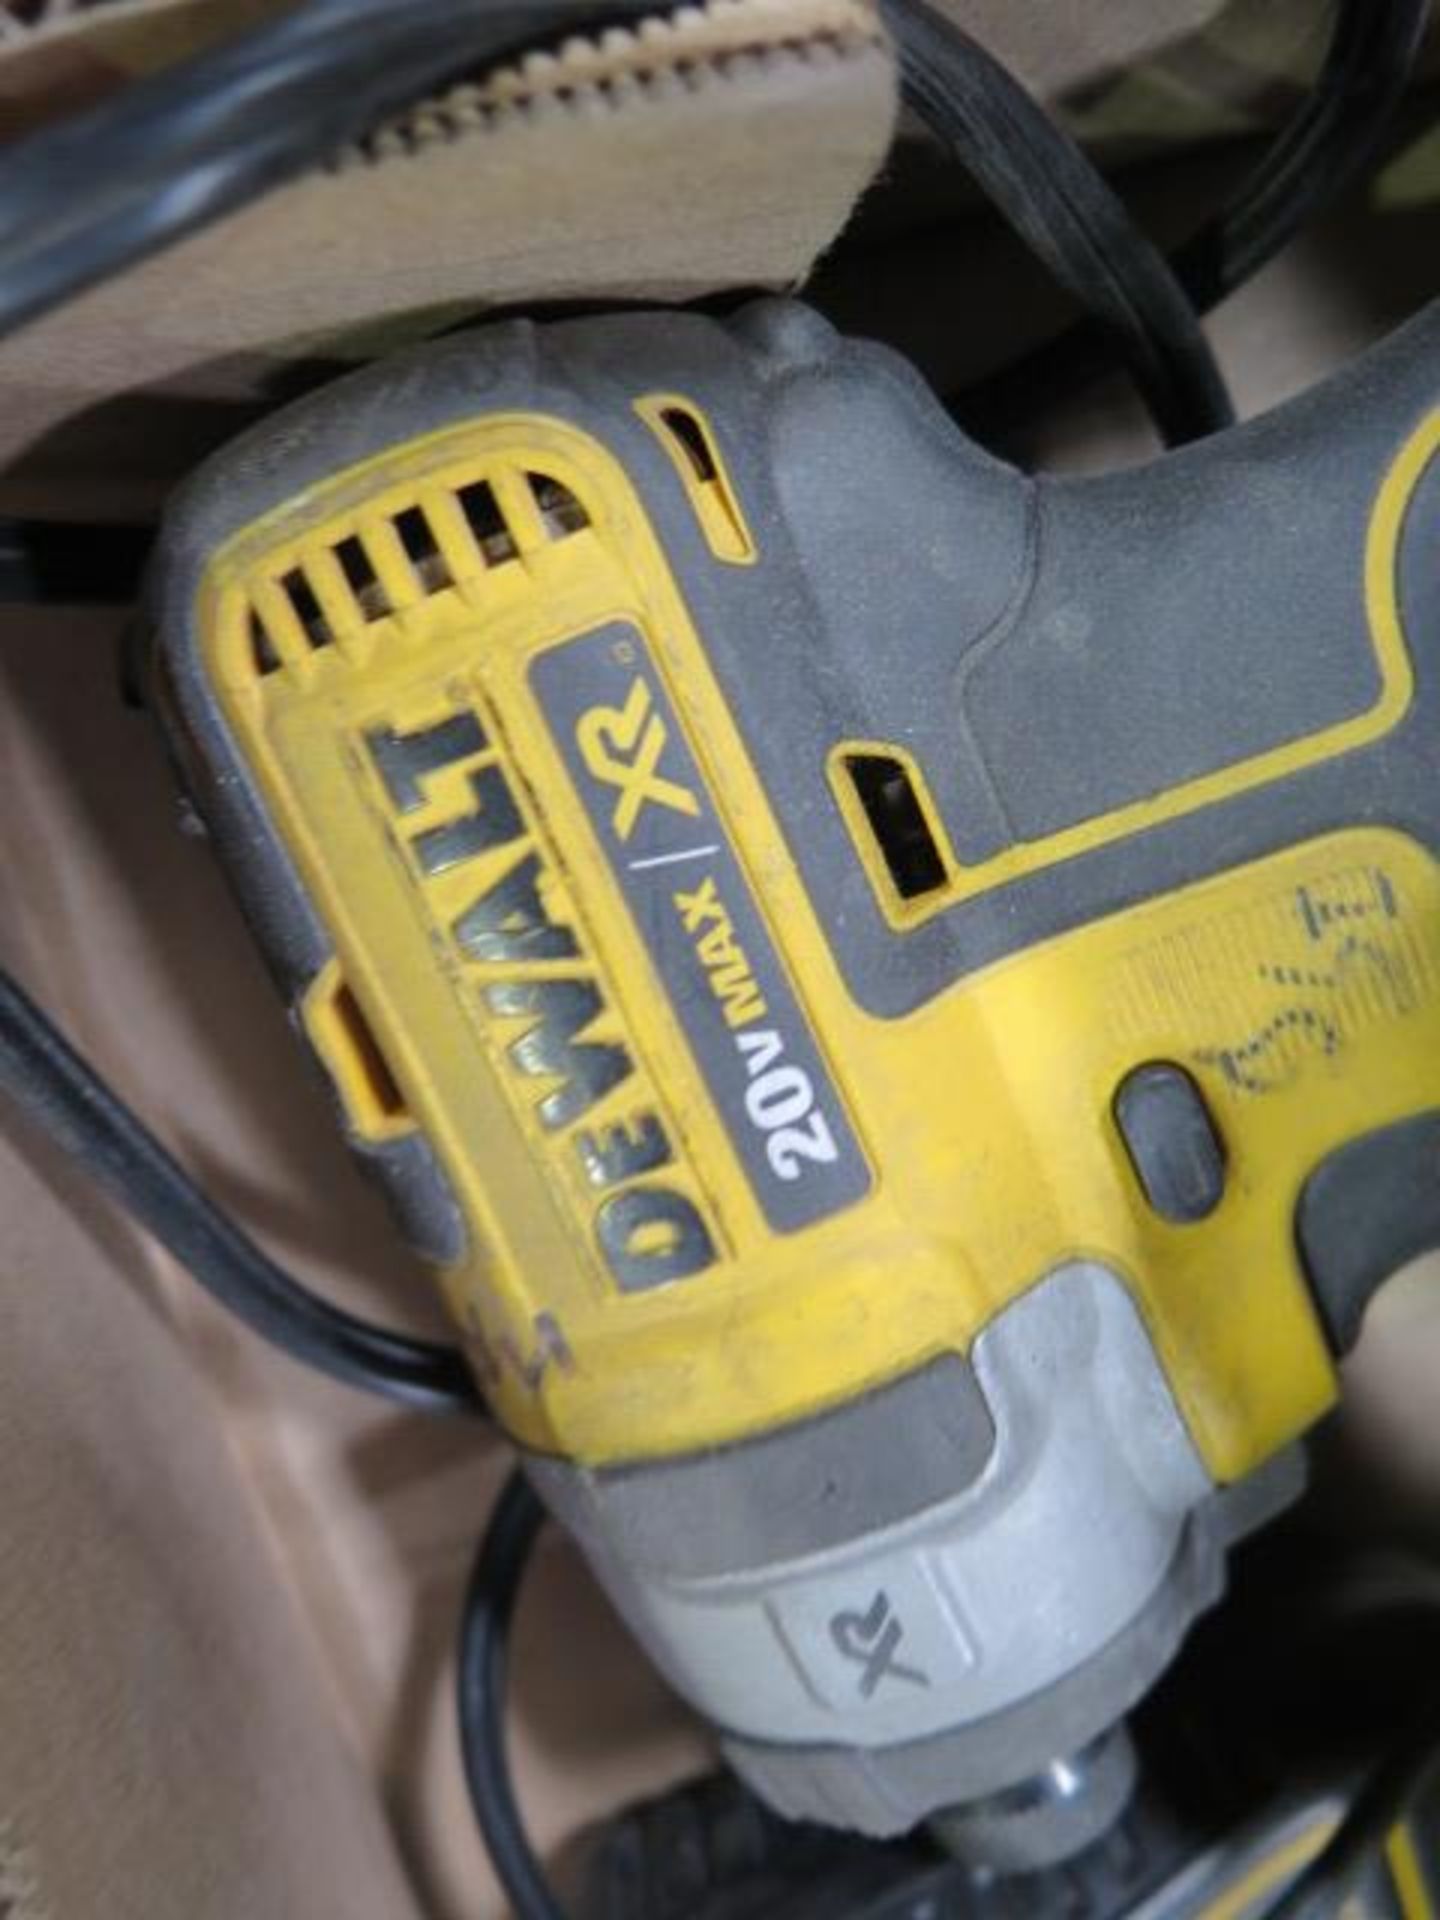 DeWalt 20 Volt Cordless Drills and Nut Drivers w/ Charger (SOLD AS-IS - NO WARRANTY) - Image 6 of 6